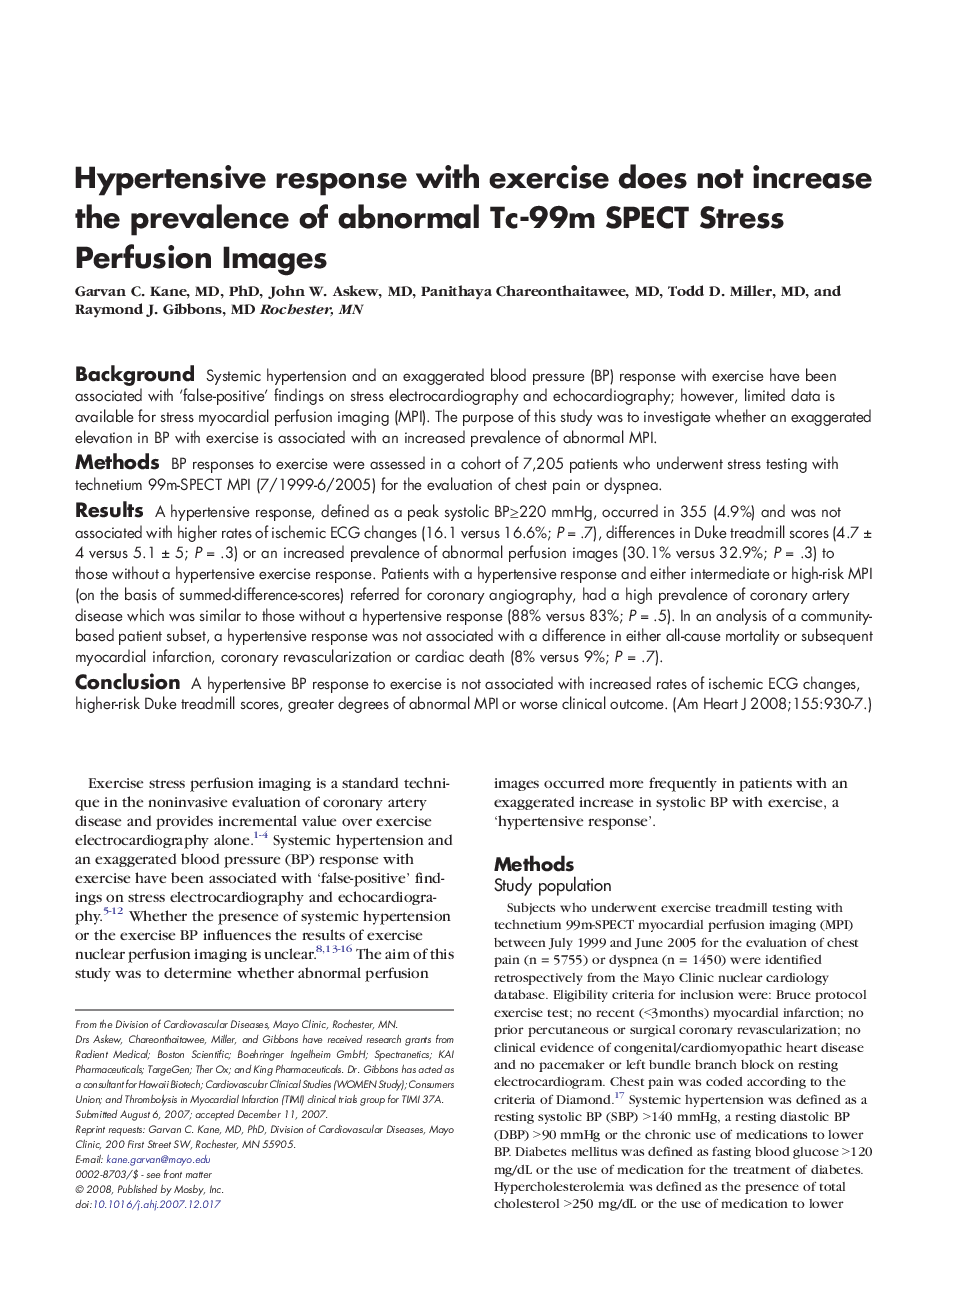 Hypertensive response with exercise does not increase the prevalence of abnormal Tc-99m SPECT Stress Perfusion Images 